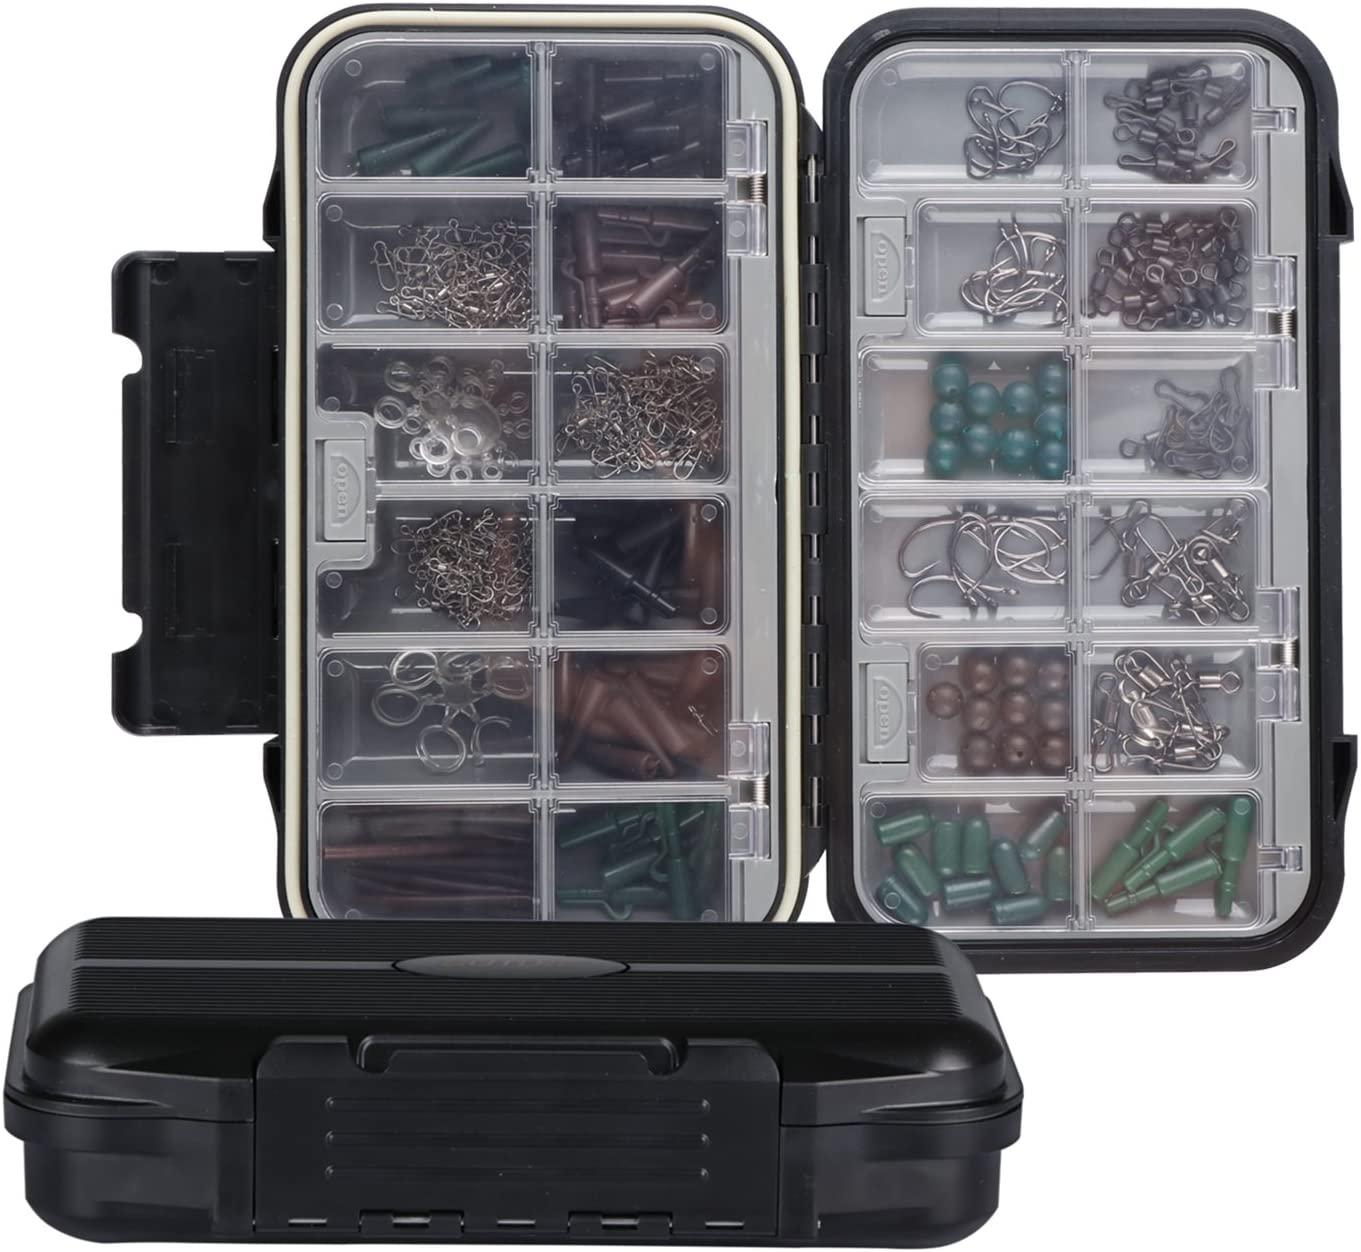  Goture Fishing Tackle Box Waterproof Tackle Box Spoon Hooks  Baits Storage Boxes with Adjustable Dividers, Plastic Tackle Box for  Casting Fishing Fly Fishing, Large/Medium/Small Organizer Fishing Box :  Sports & Outdoors